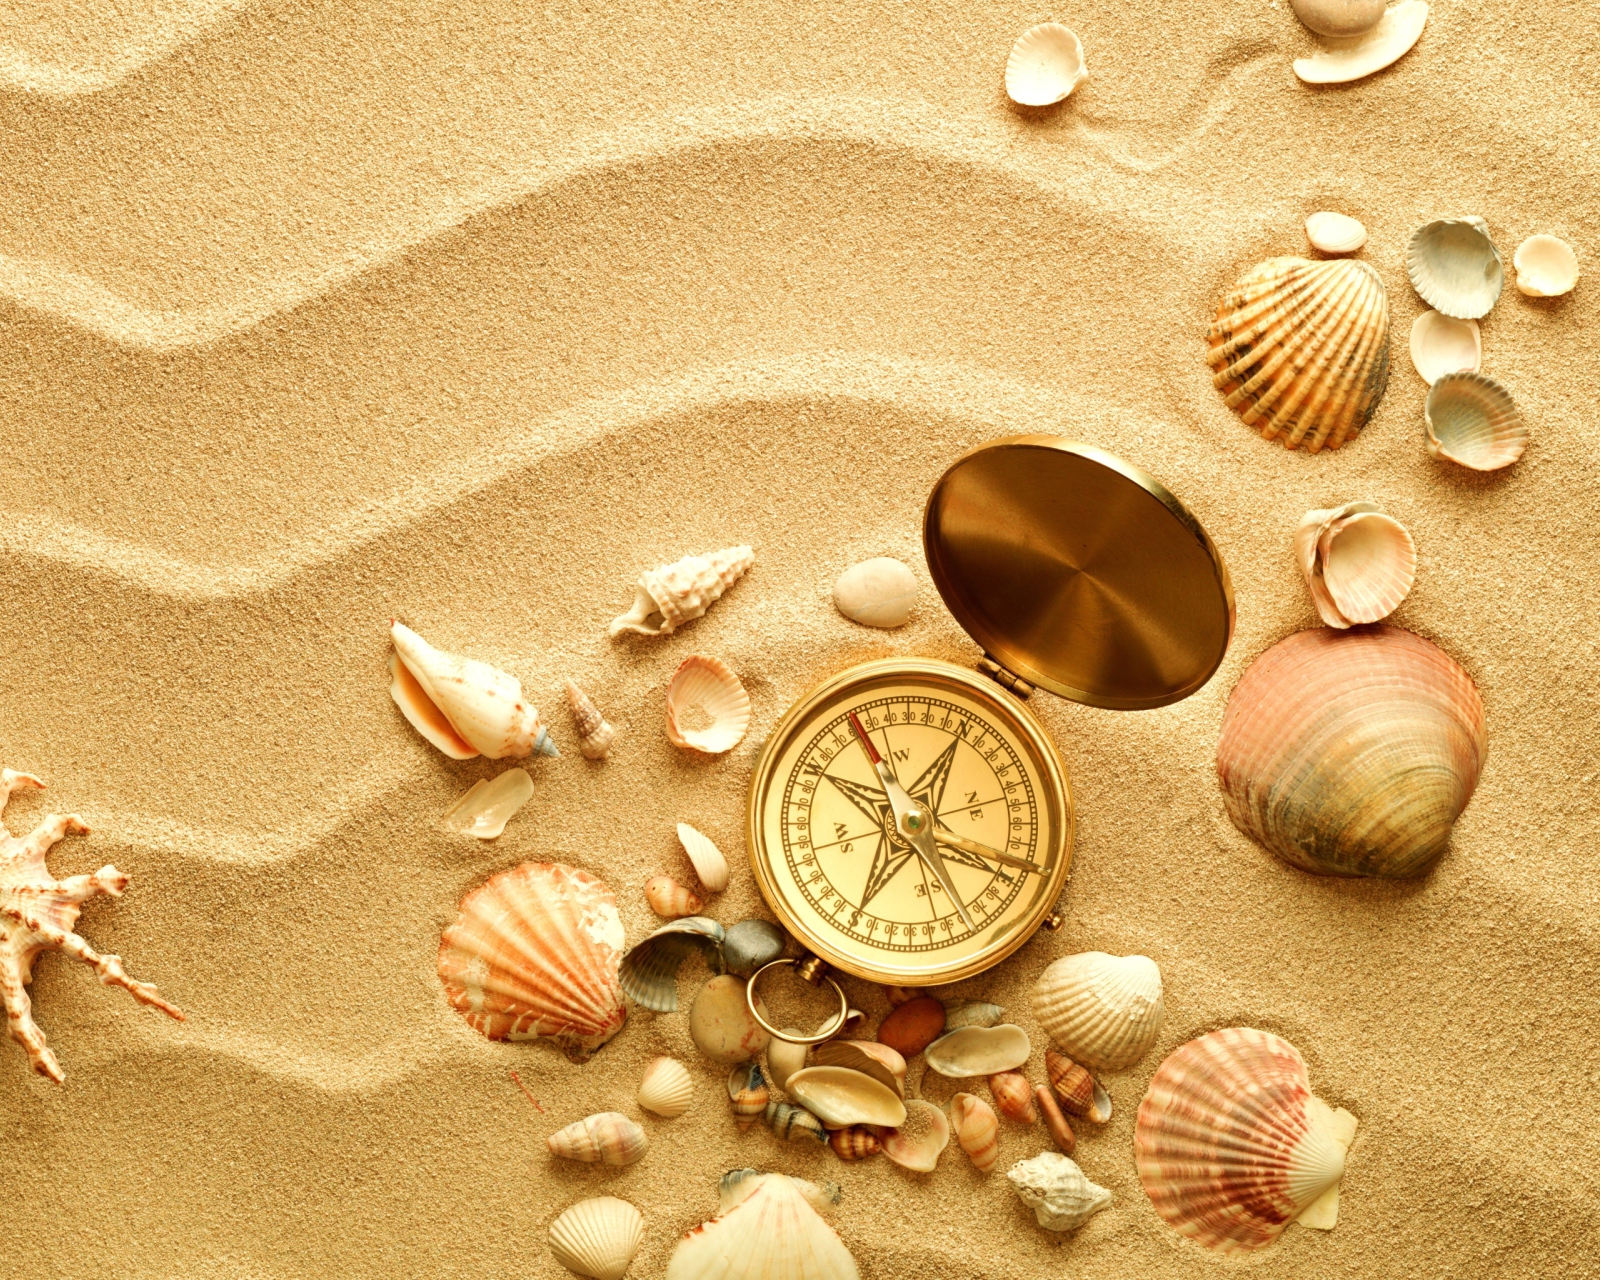 Das Compass And Shells On Sand Wallpaper 1600x1280